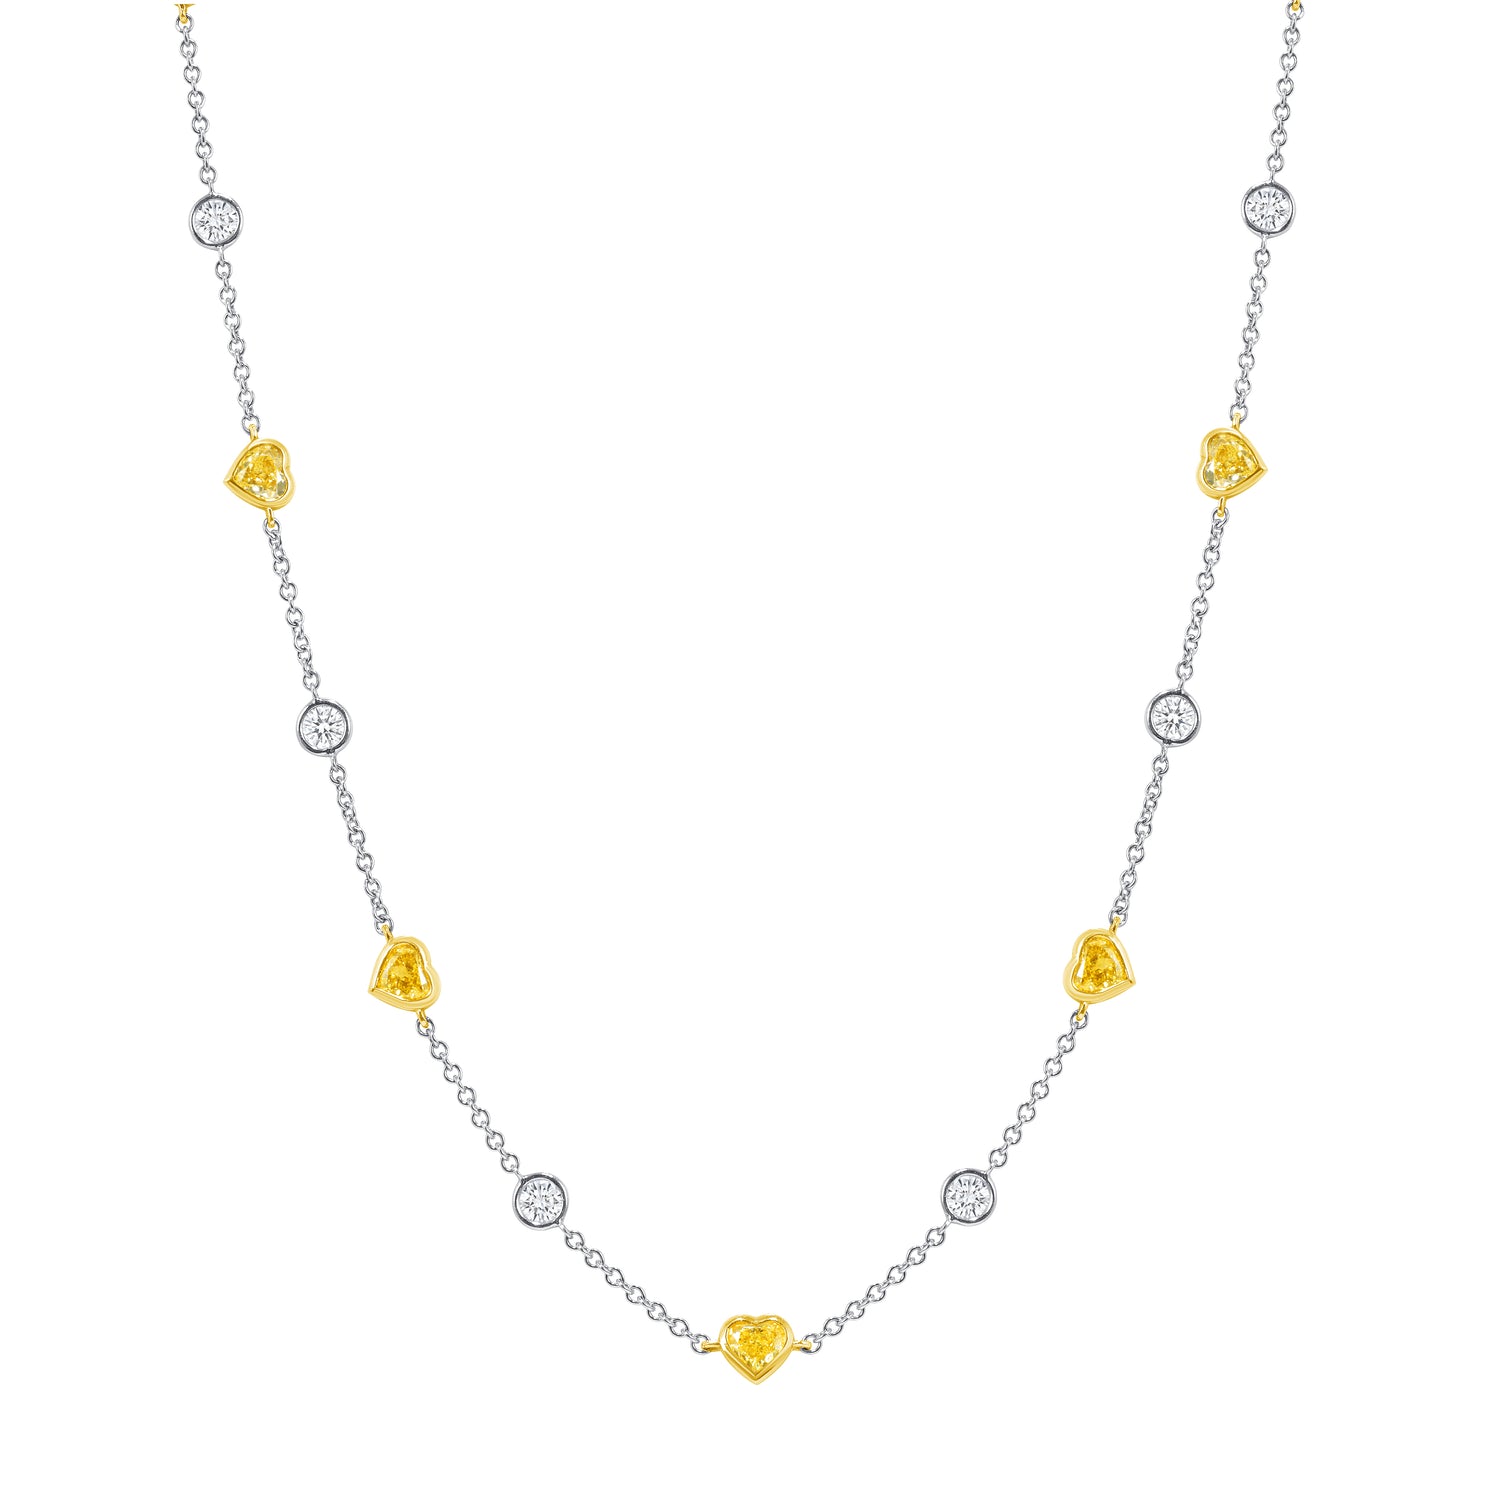 5.82 CT. Heart Shape Fancy Yellow Diamond and Round Brilliant Diamond Necklace in 18K White Gold and Yellow Gold